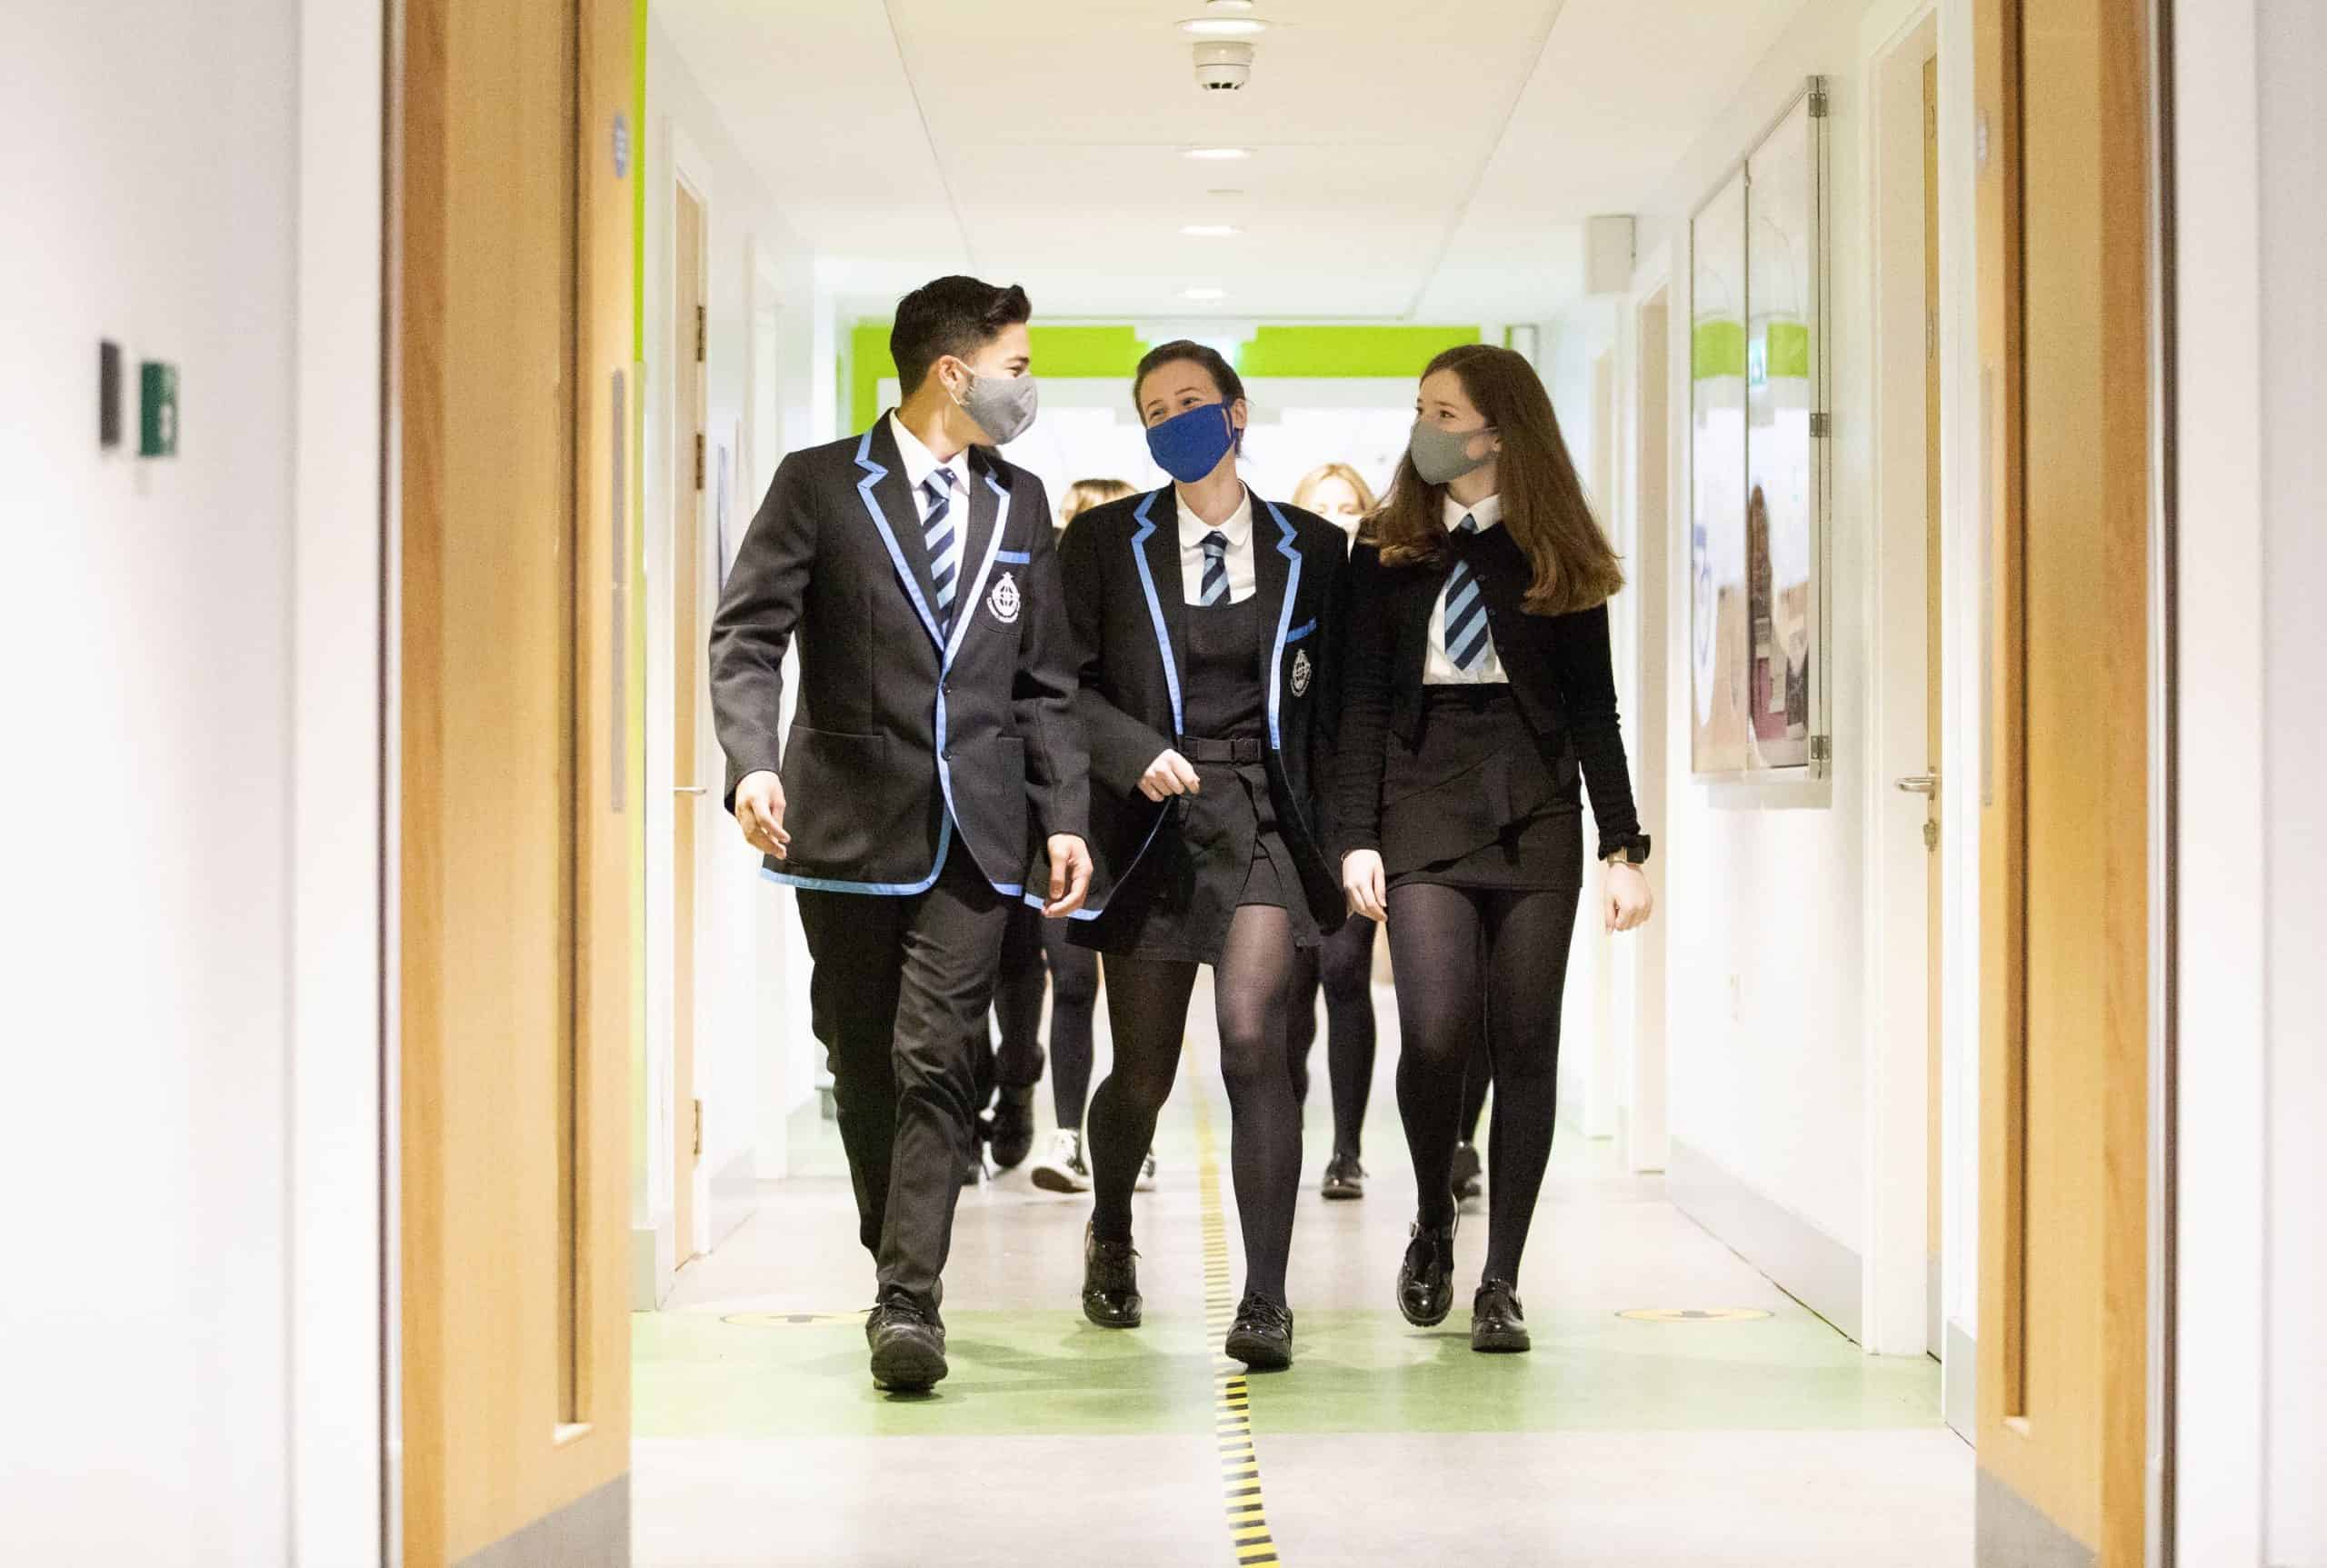 ‘Mistake’ if face masks in class are scrapped as schools may face spike in Covid cases